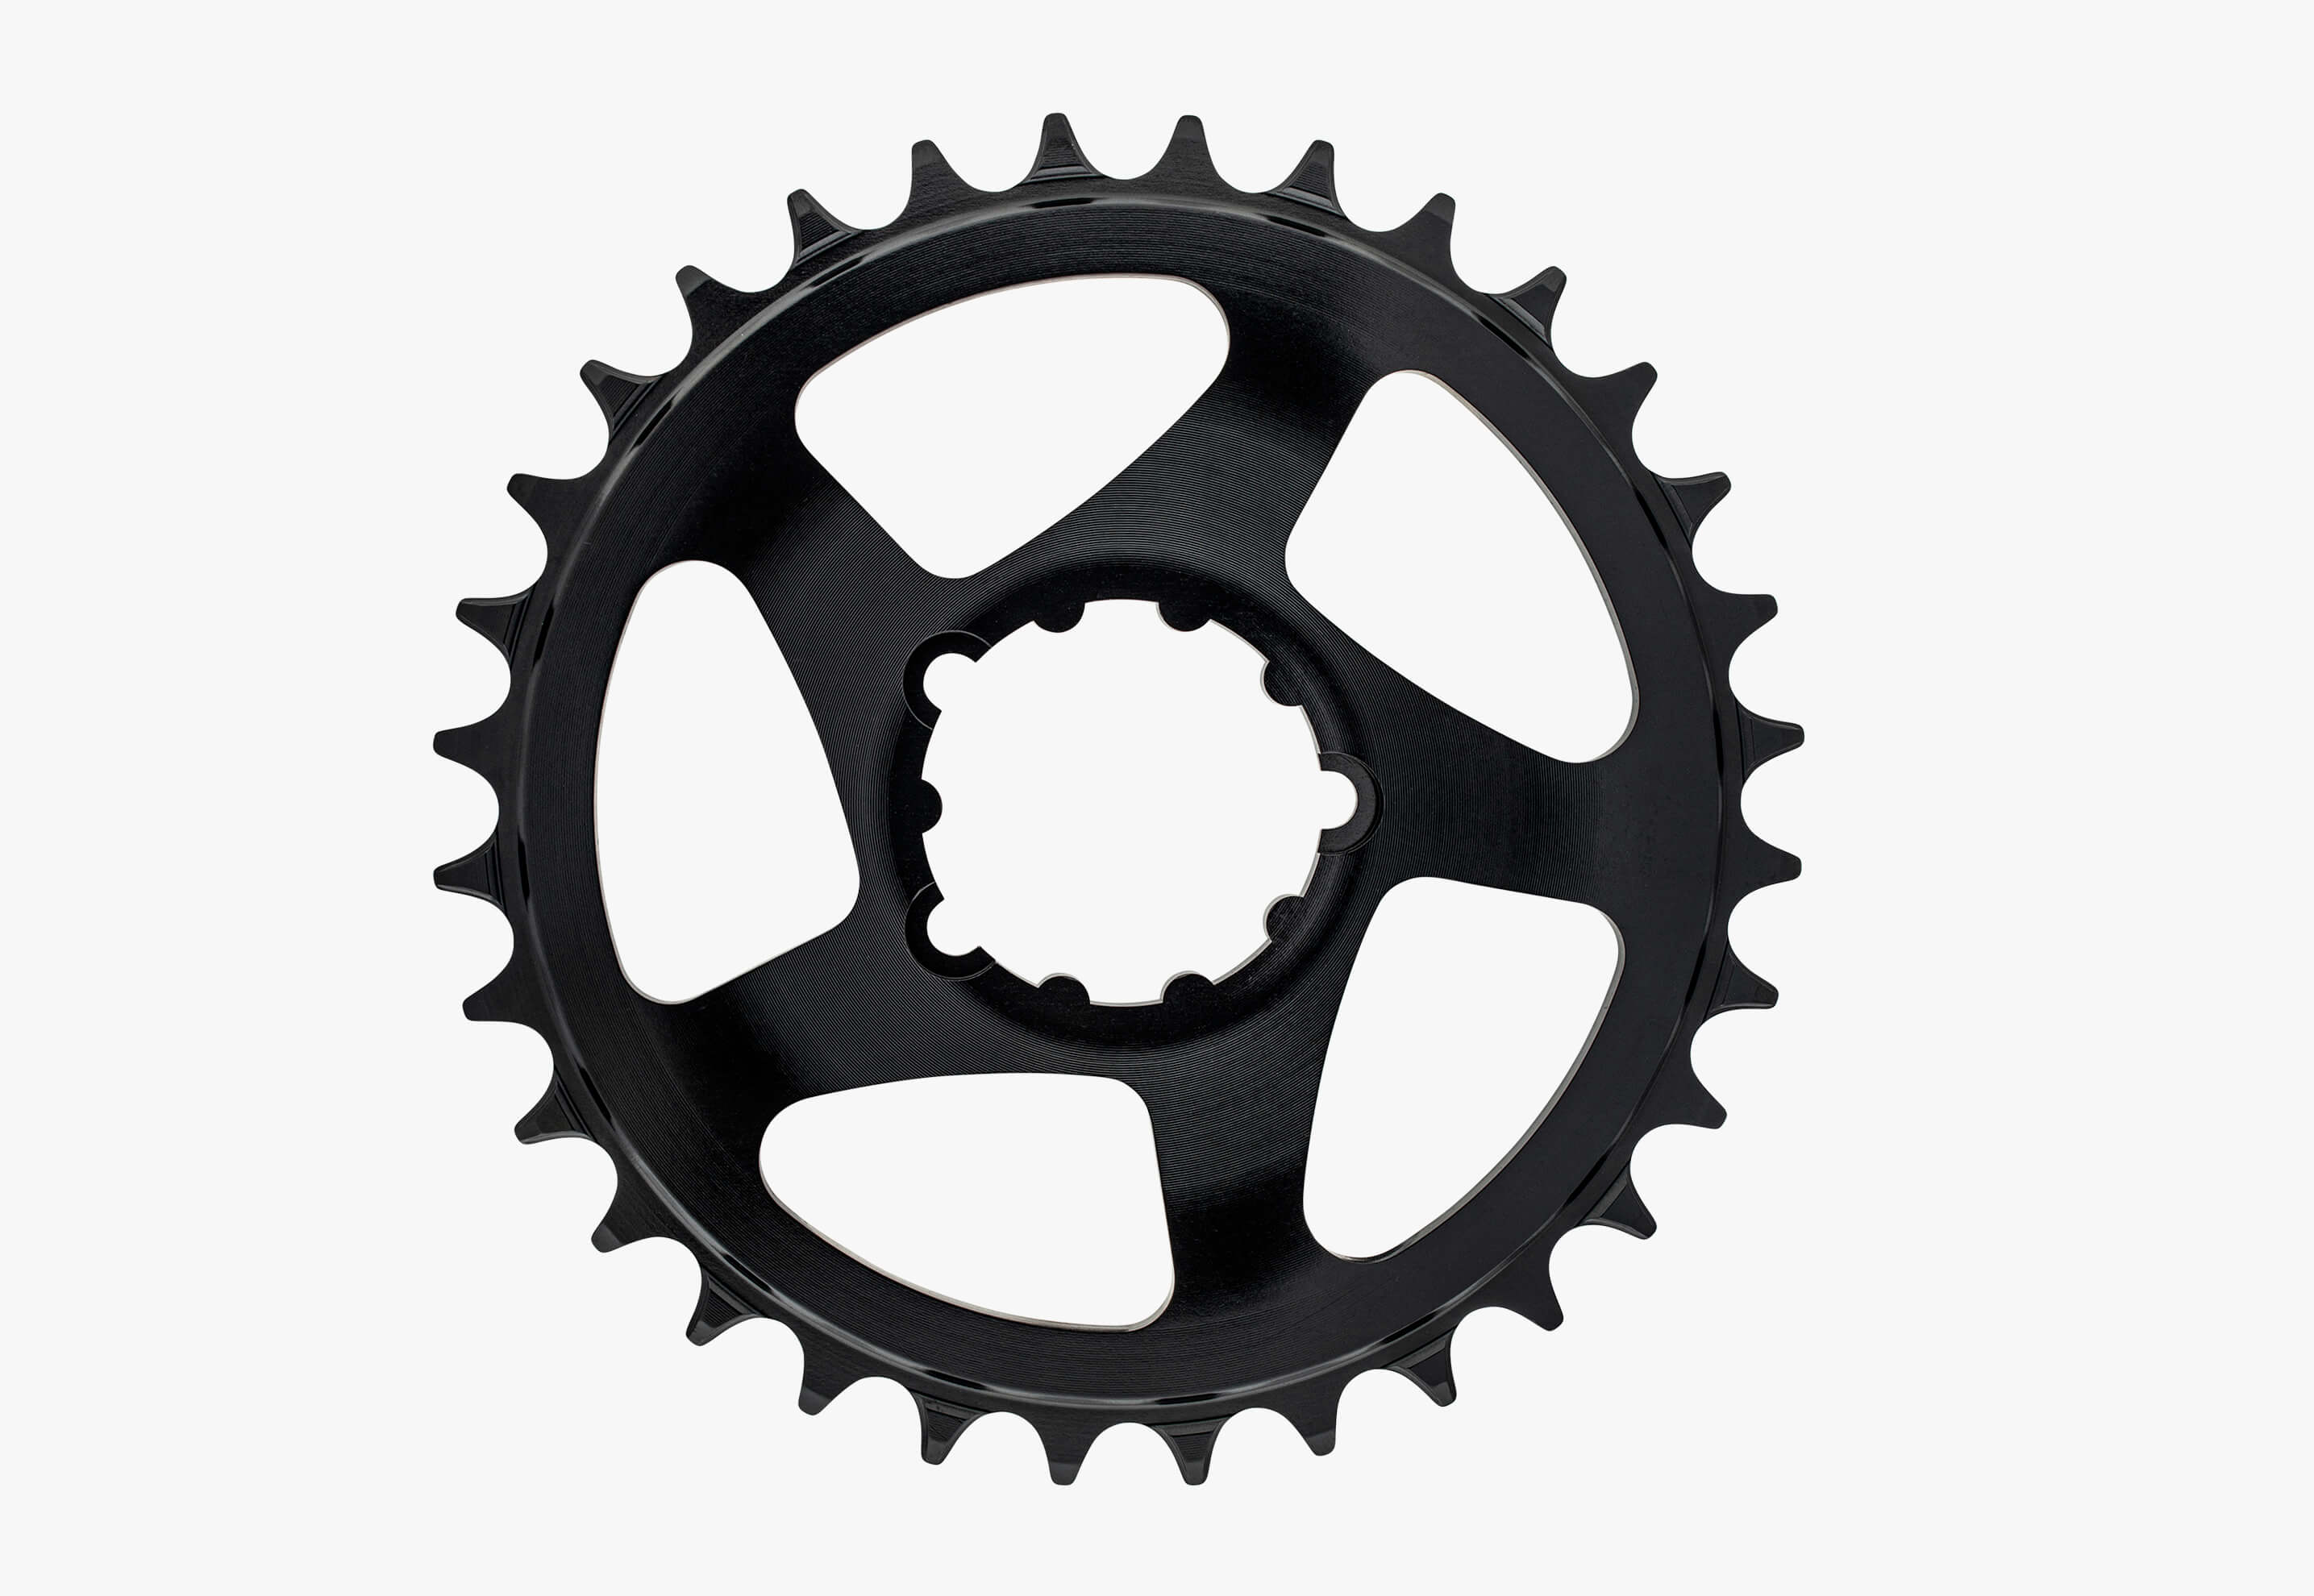 Raceface 1x Chainring 3 Bolt / Sram Direct Mount 10-12 Speed